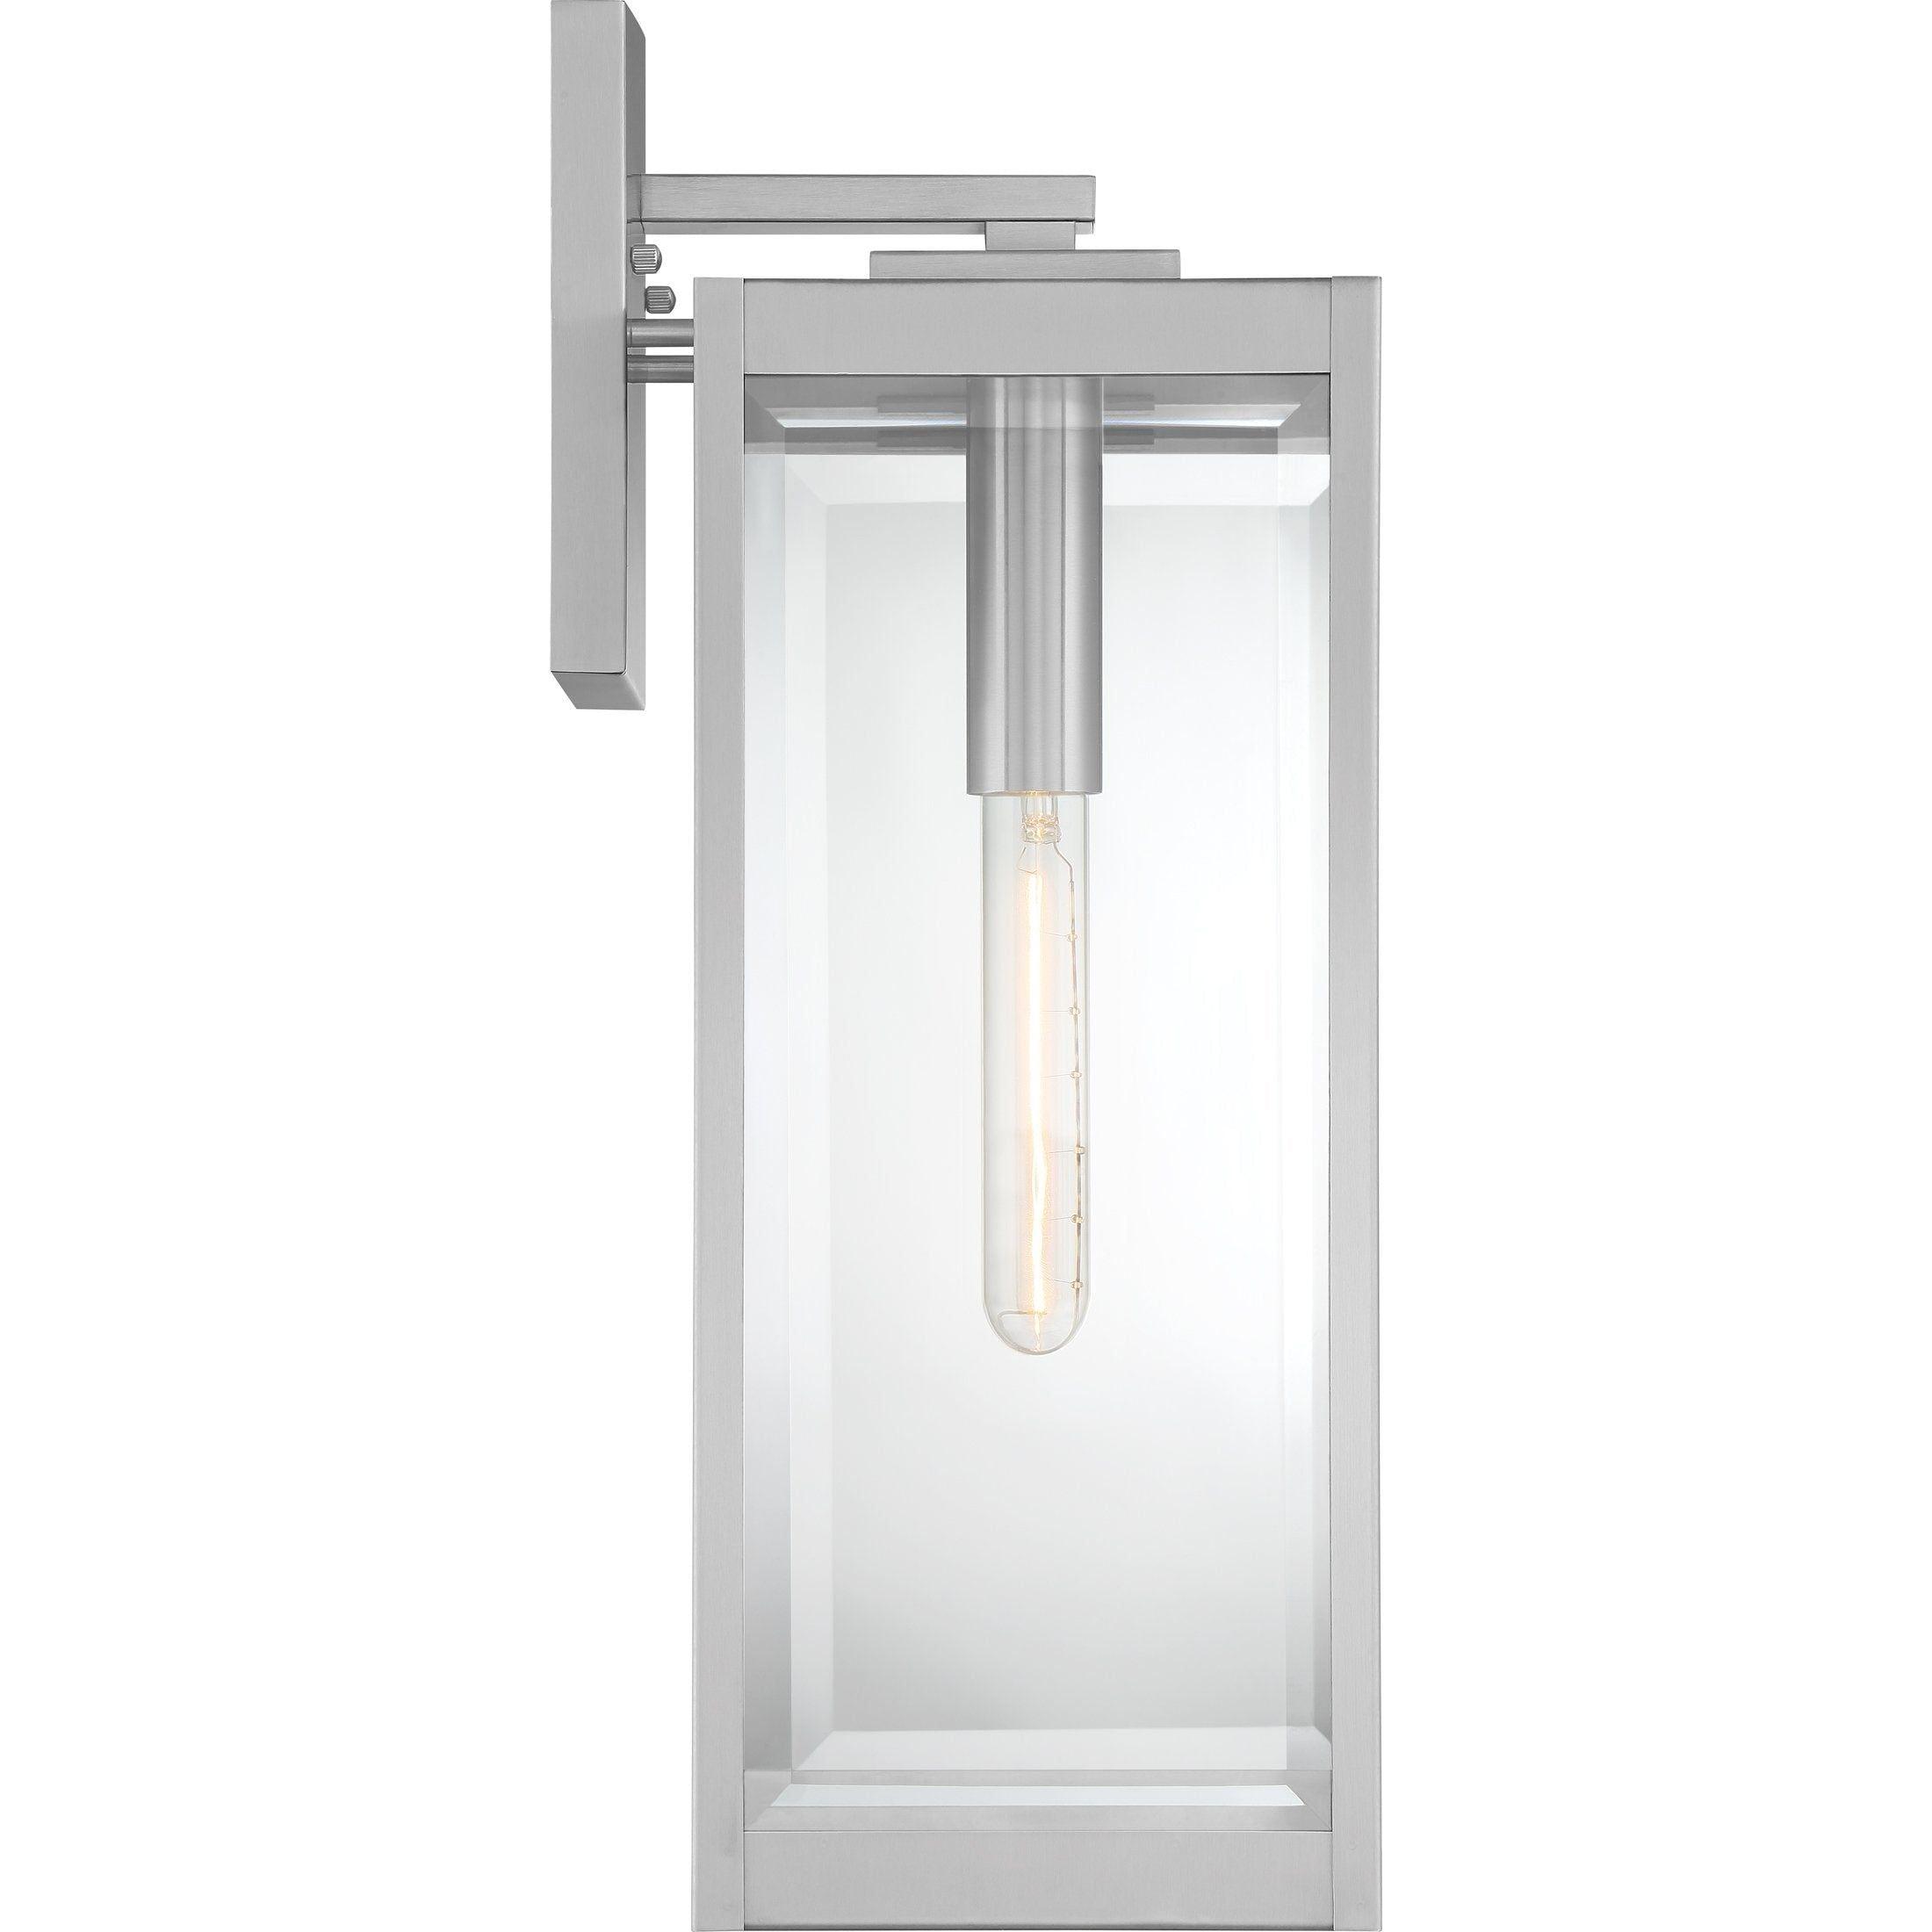 Quoizel - Westover Outdoor Wall Light - Lights Canada